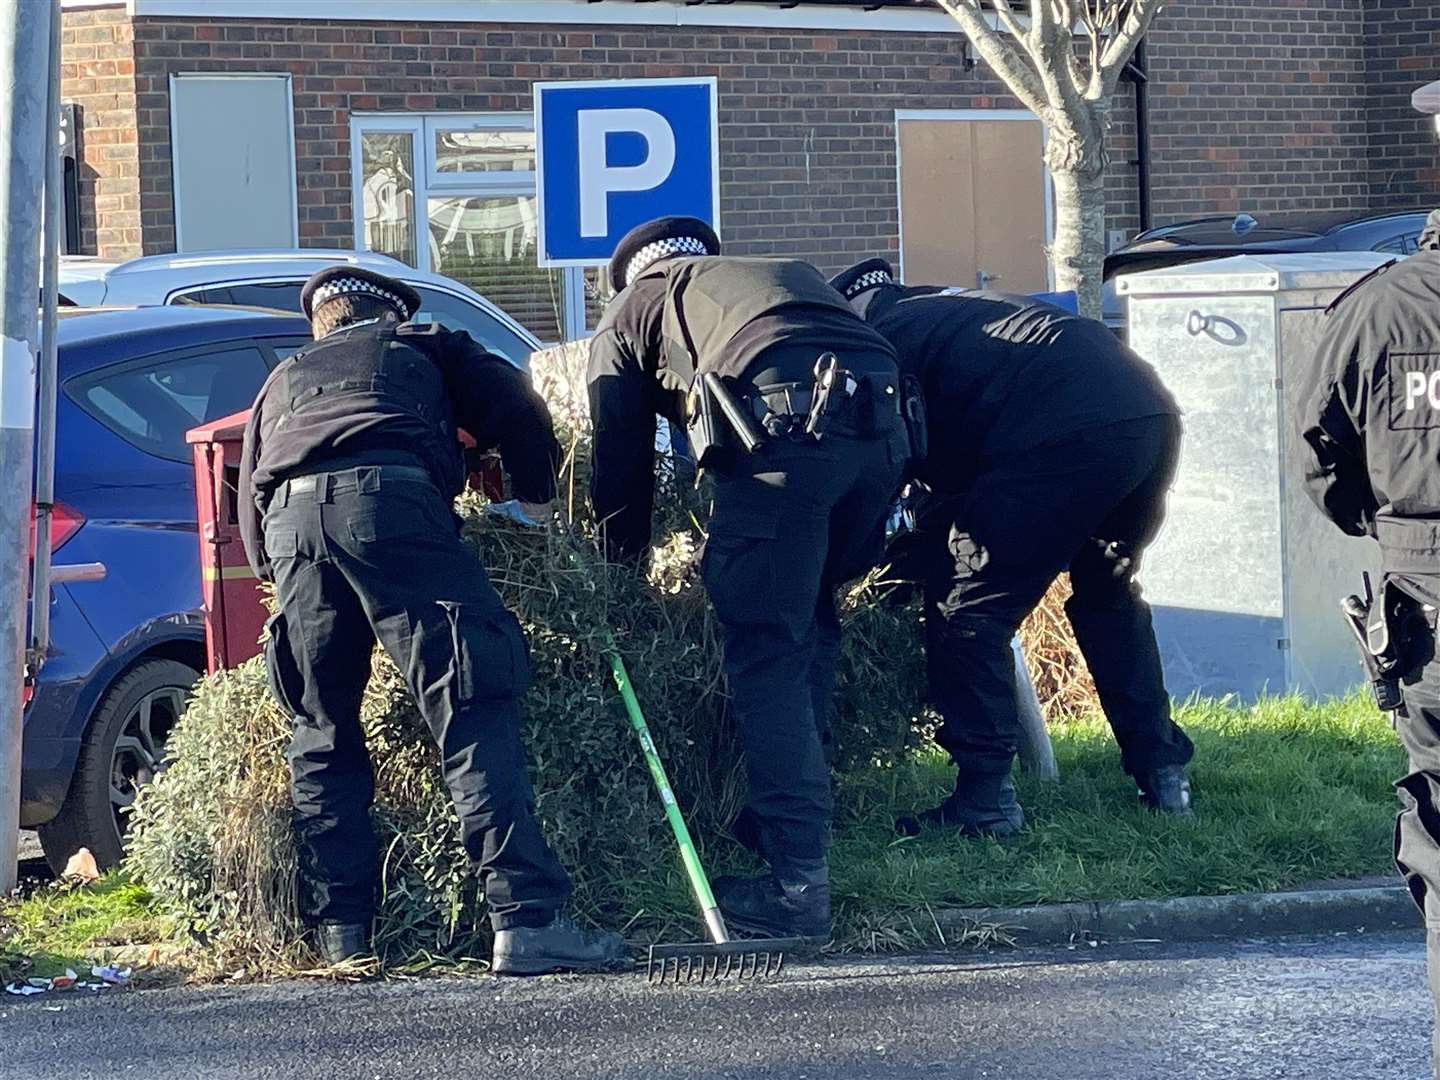 Police search bushes in Dymchurch following reports of a stabbing. Photo: Alex Jee